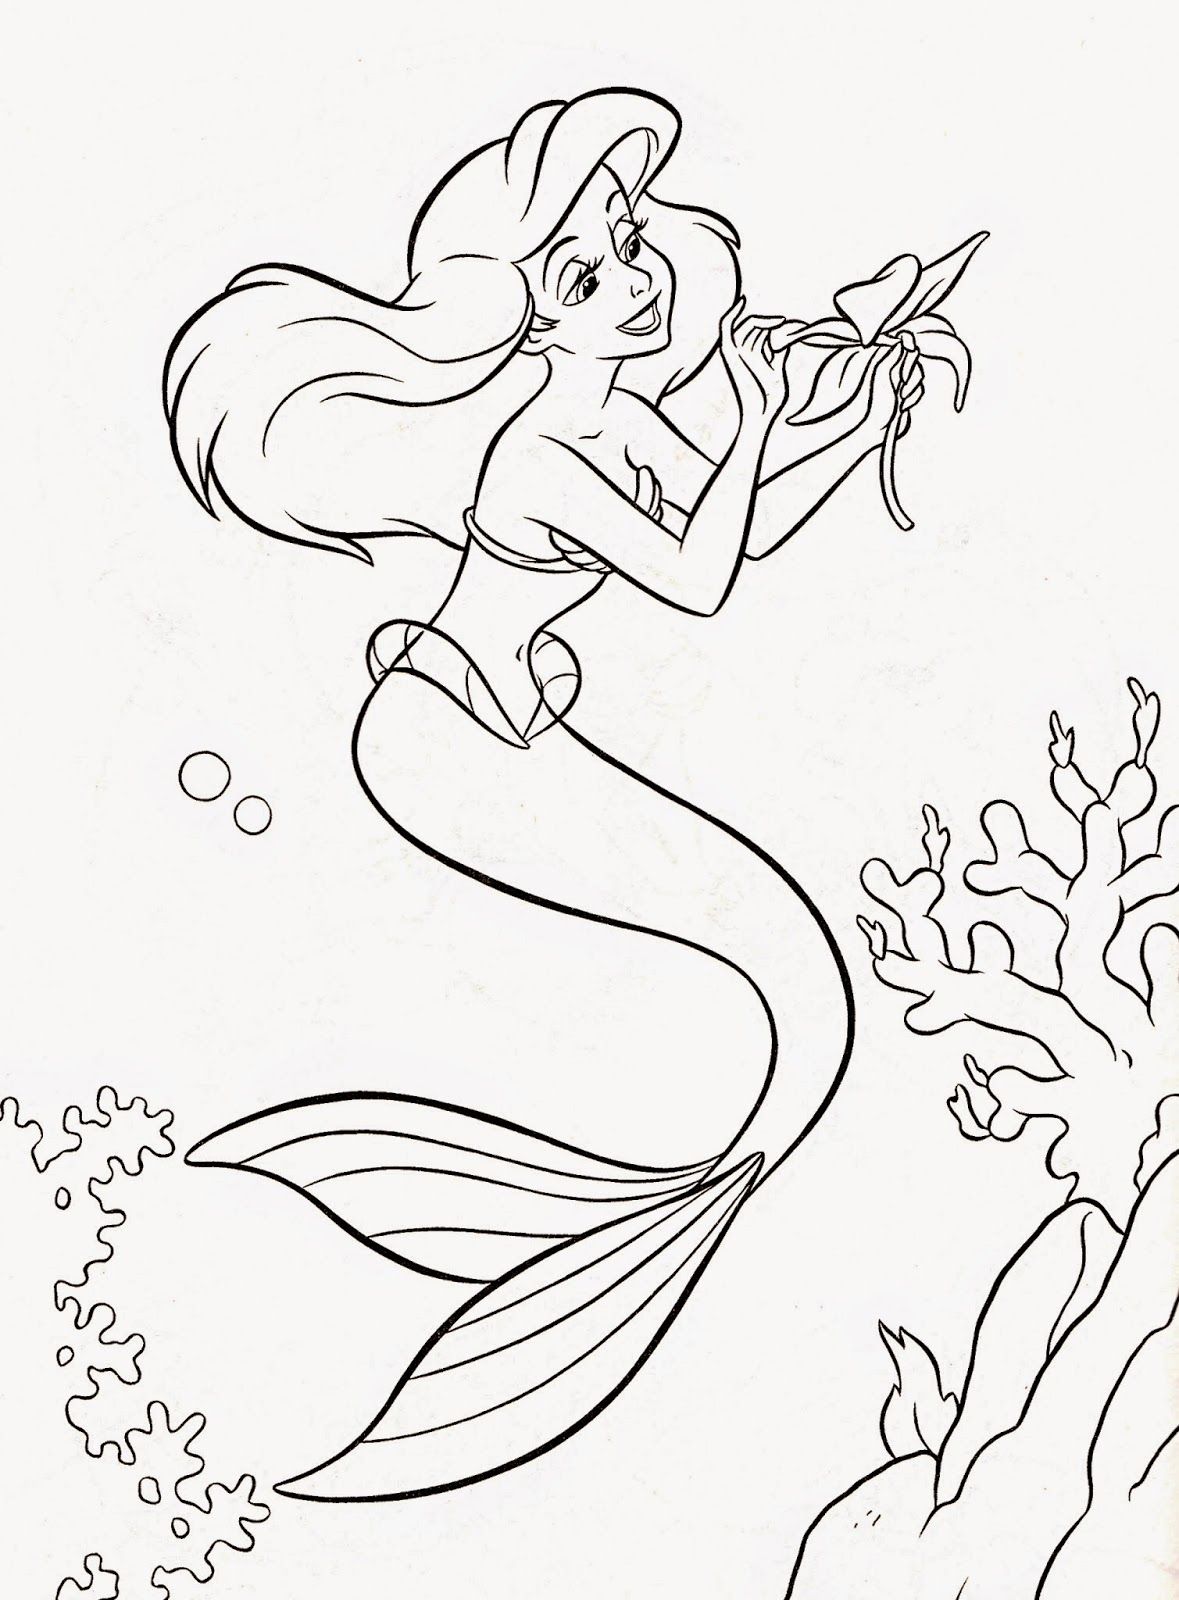 32 Disney Coloring Pages for Kids - awfam.com